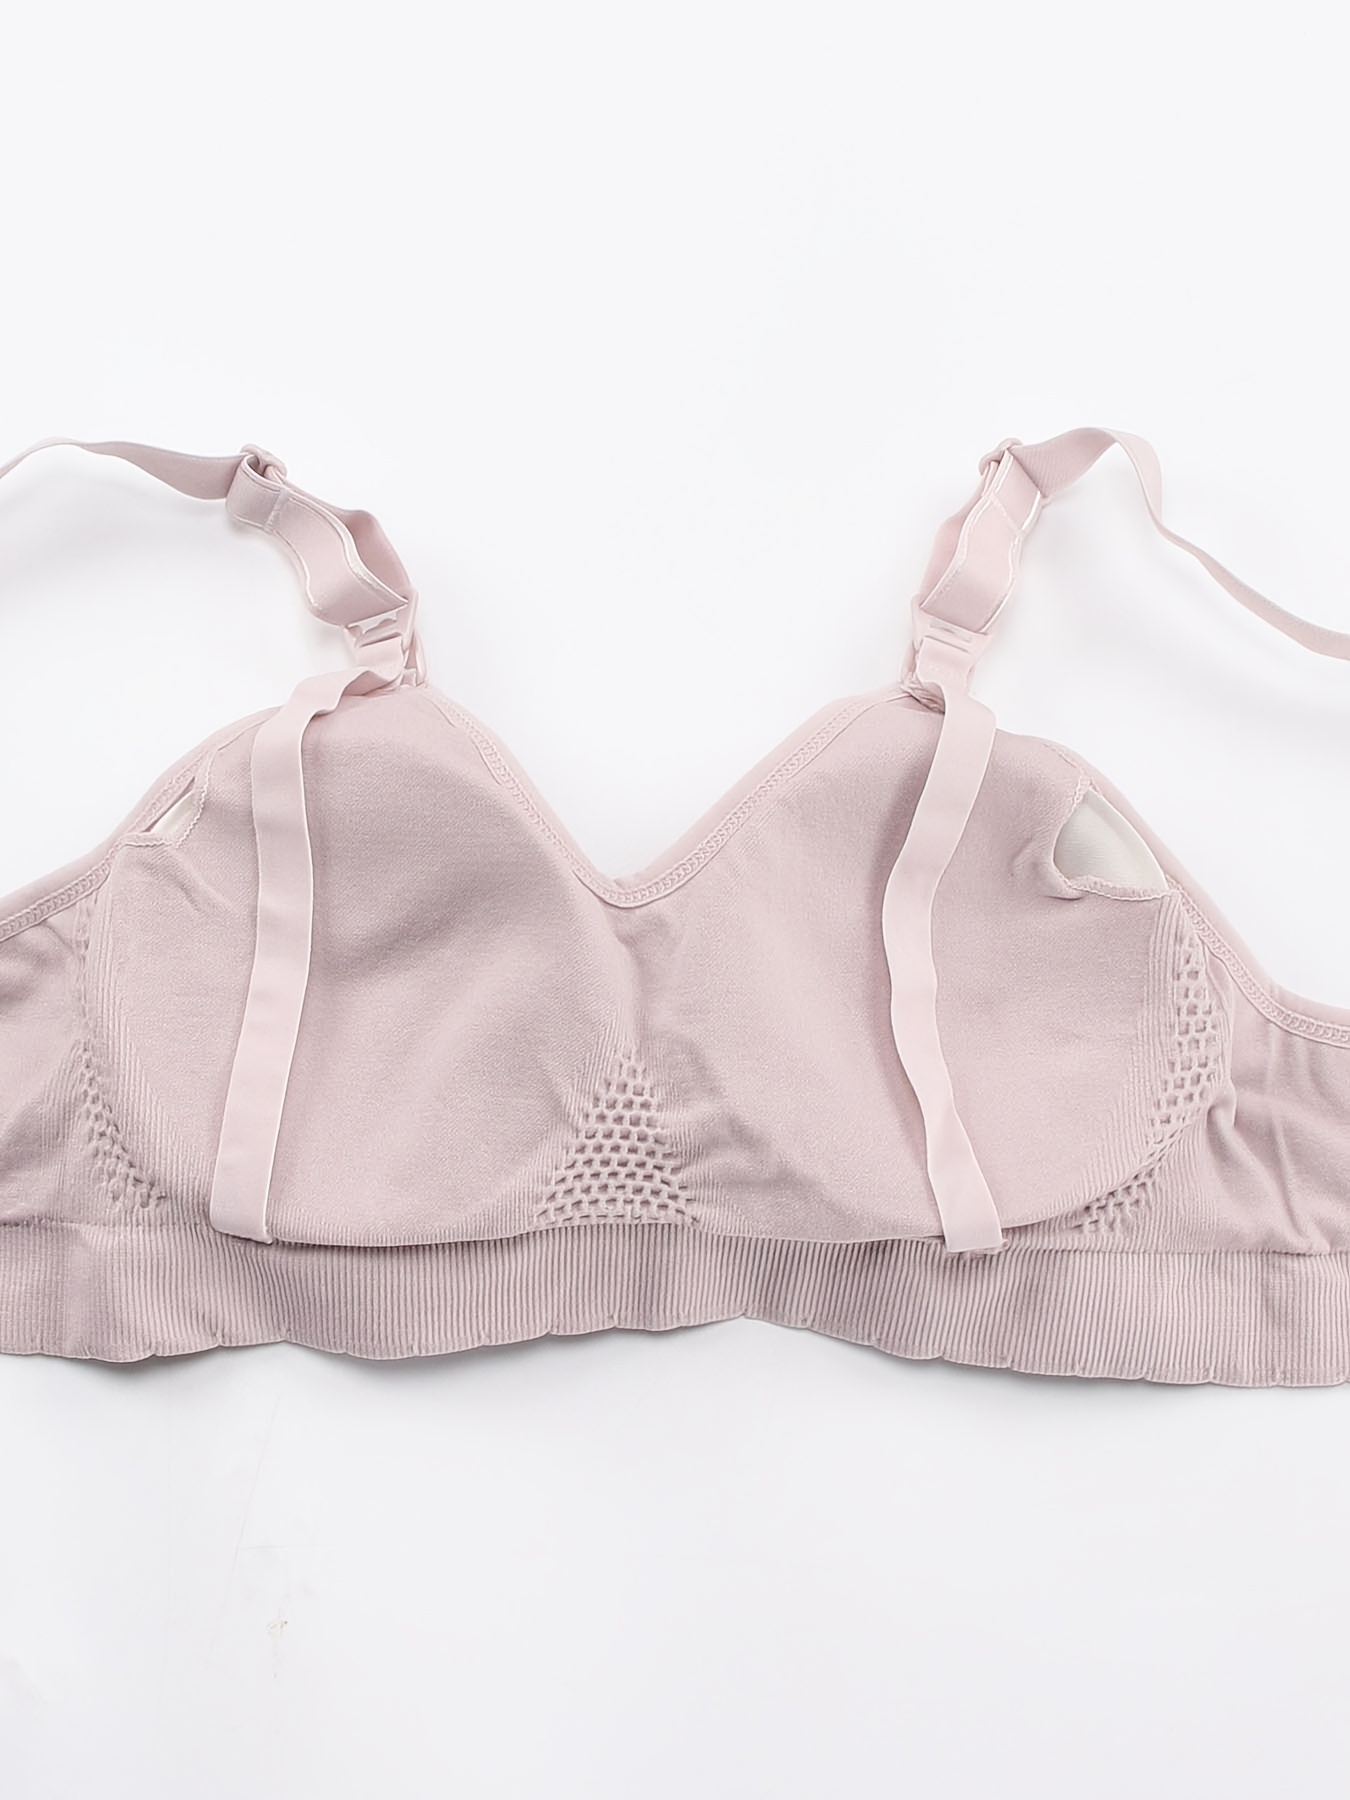 Nursing Bra Maternity Bra With Removable Pads Front Open Buckle